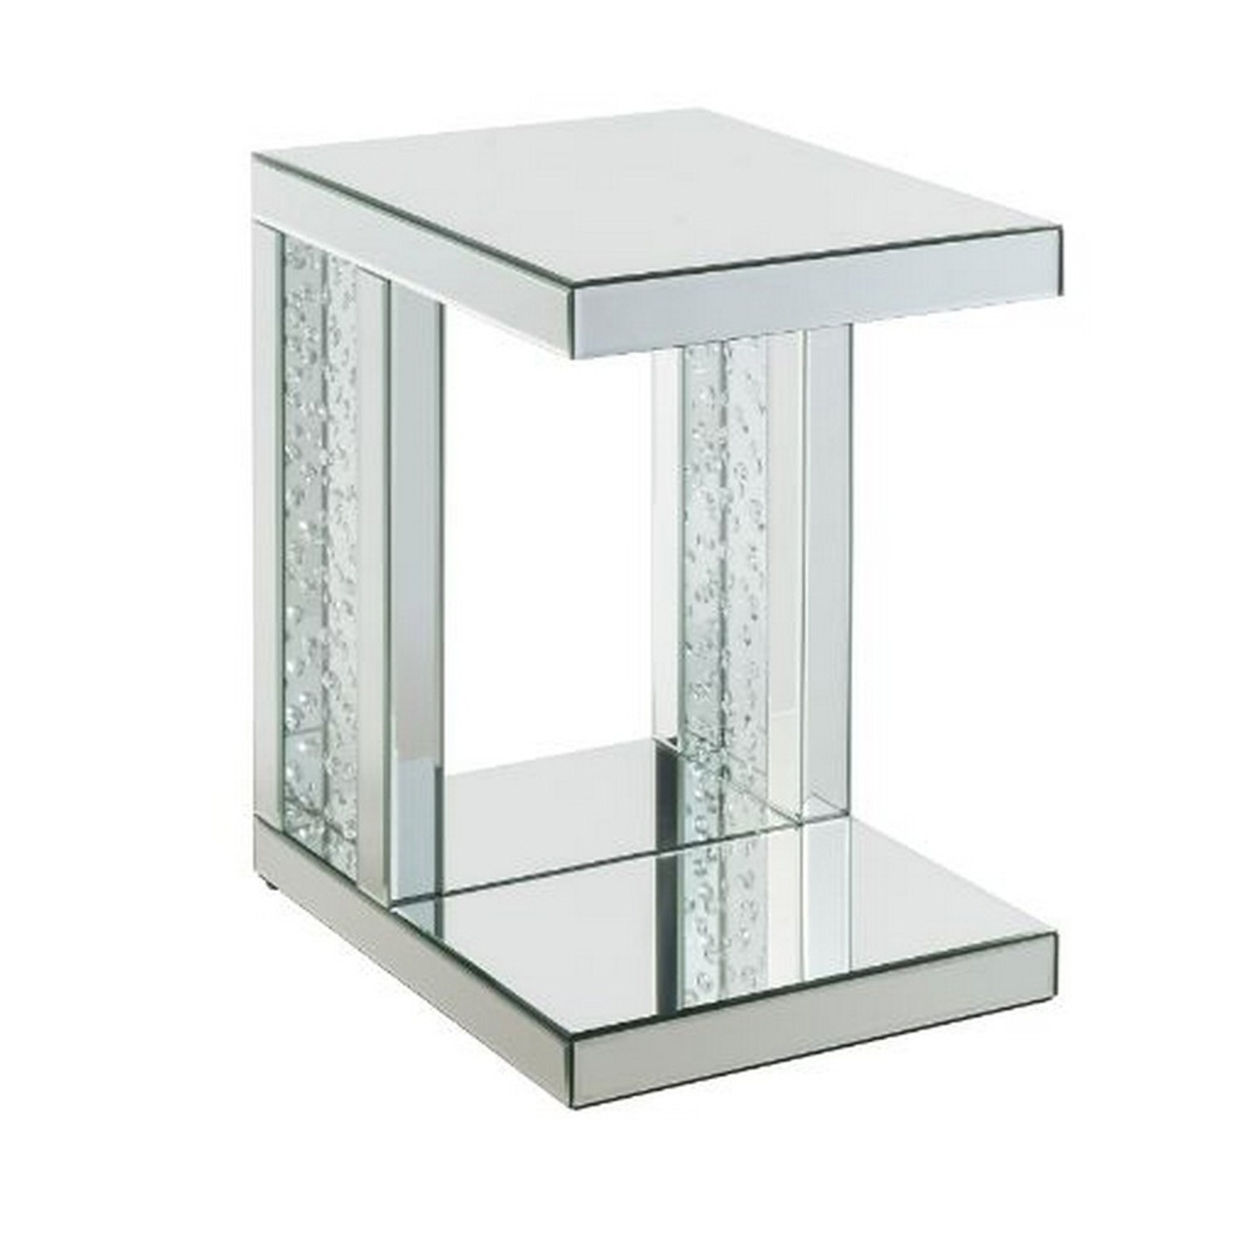 Mirrored Accent Table With C Shape And Faux Crystals, Silver- Saltoro Sherpi